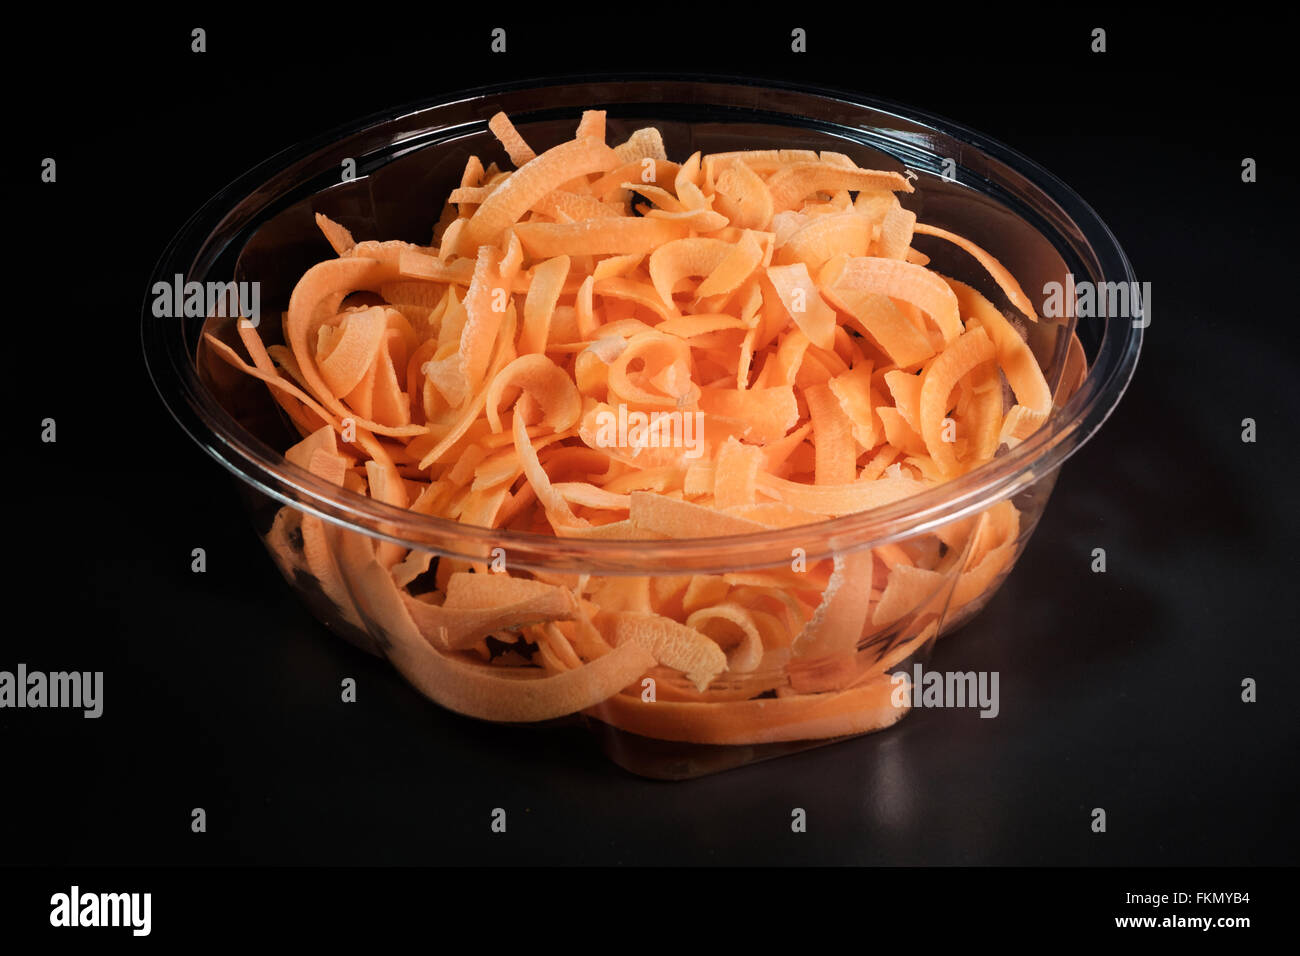 Carrots cut into julienne strips in a bowl with black background Stock Photo